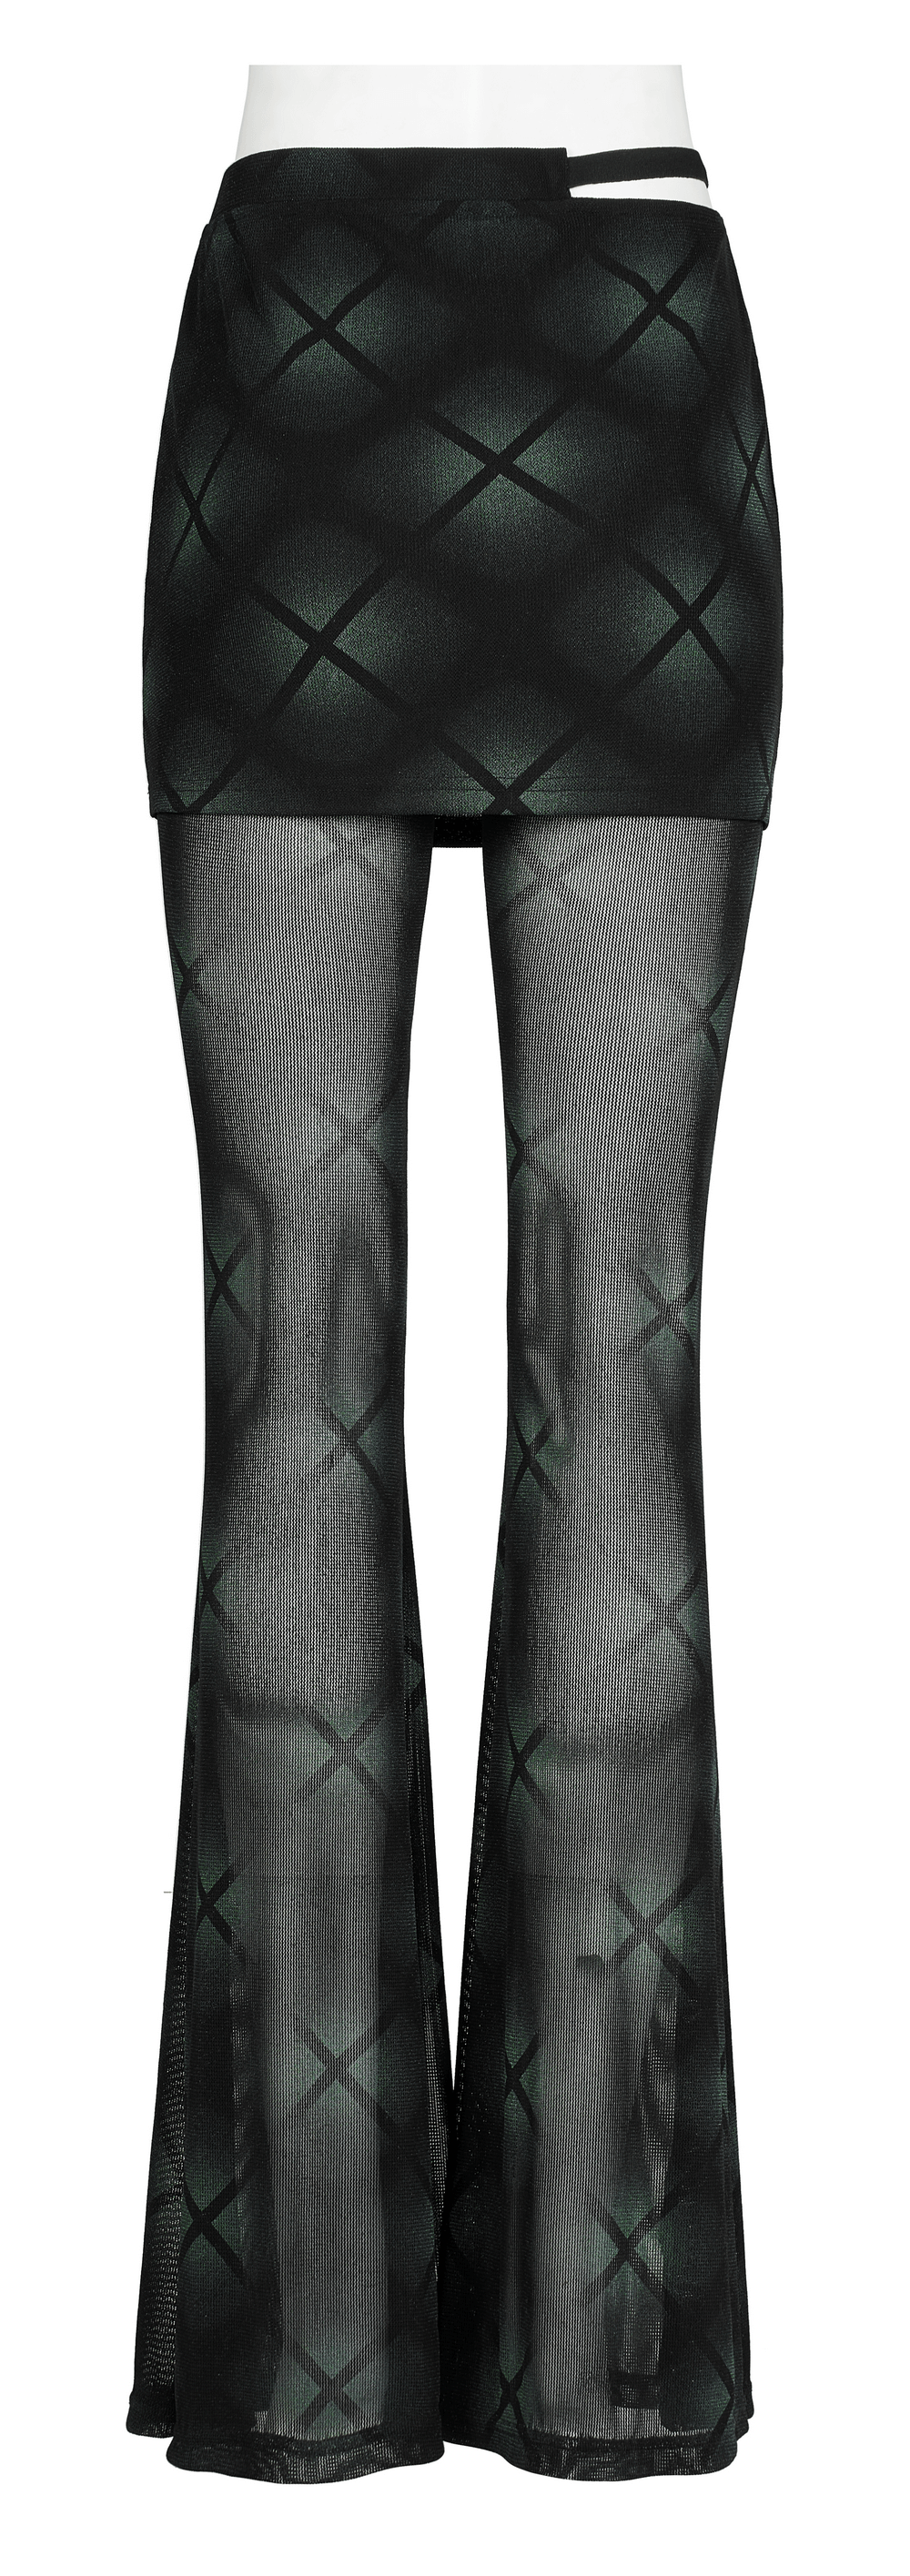 Gothic Plaid Mesh Flared Skirt-Pants With S-Shaped Buckle